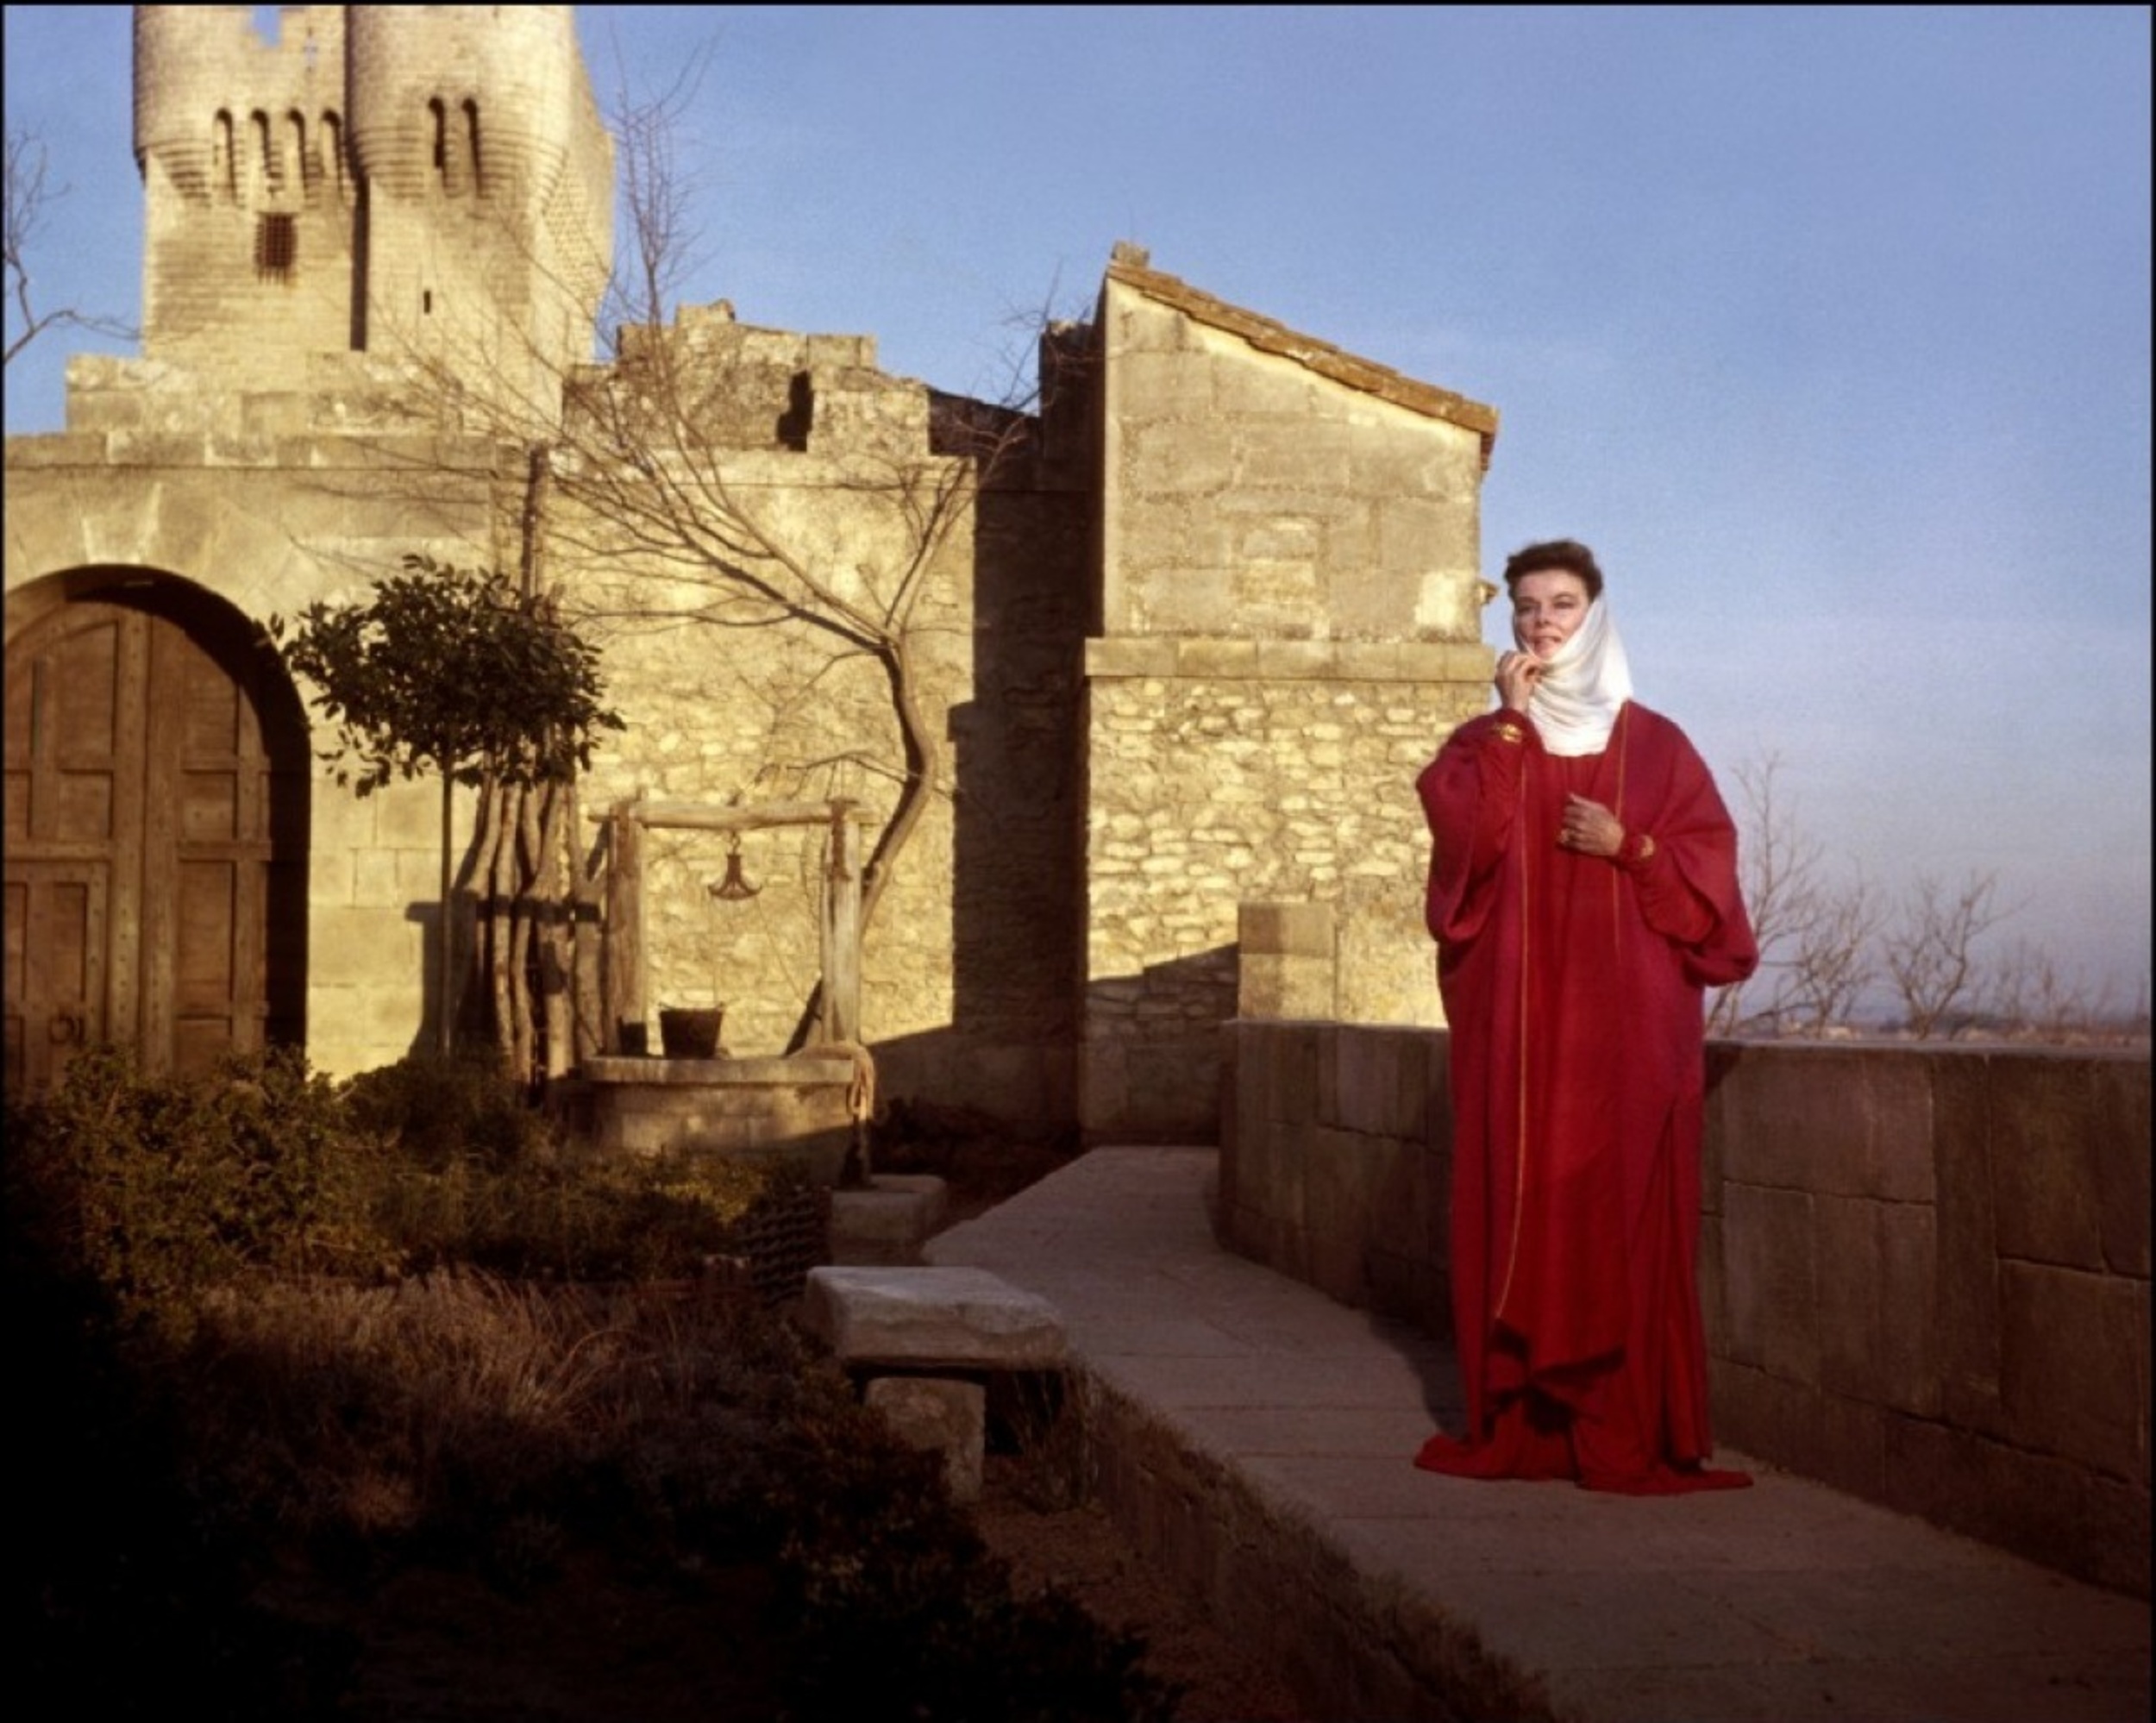 <p>Not only is O’Toole in this movie, but he played Henry II again. However, the focus is on his marriage to Eleanor of Aquitaine this time. Anthony Hopkins was given his first major role as Richard the Lionheart. Hepburn won Best Actress, her third in that category, further establishing herself as an all-time legendary actor.</p><p>You may also like: <a href='https://www.yardbarker.com/entertainment/articles/women_who_shaped_millennial_feminists_012924/s1__38887376'>Women who shaped millennial feminists</a></p>